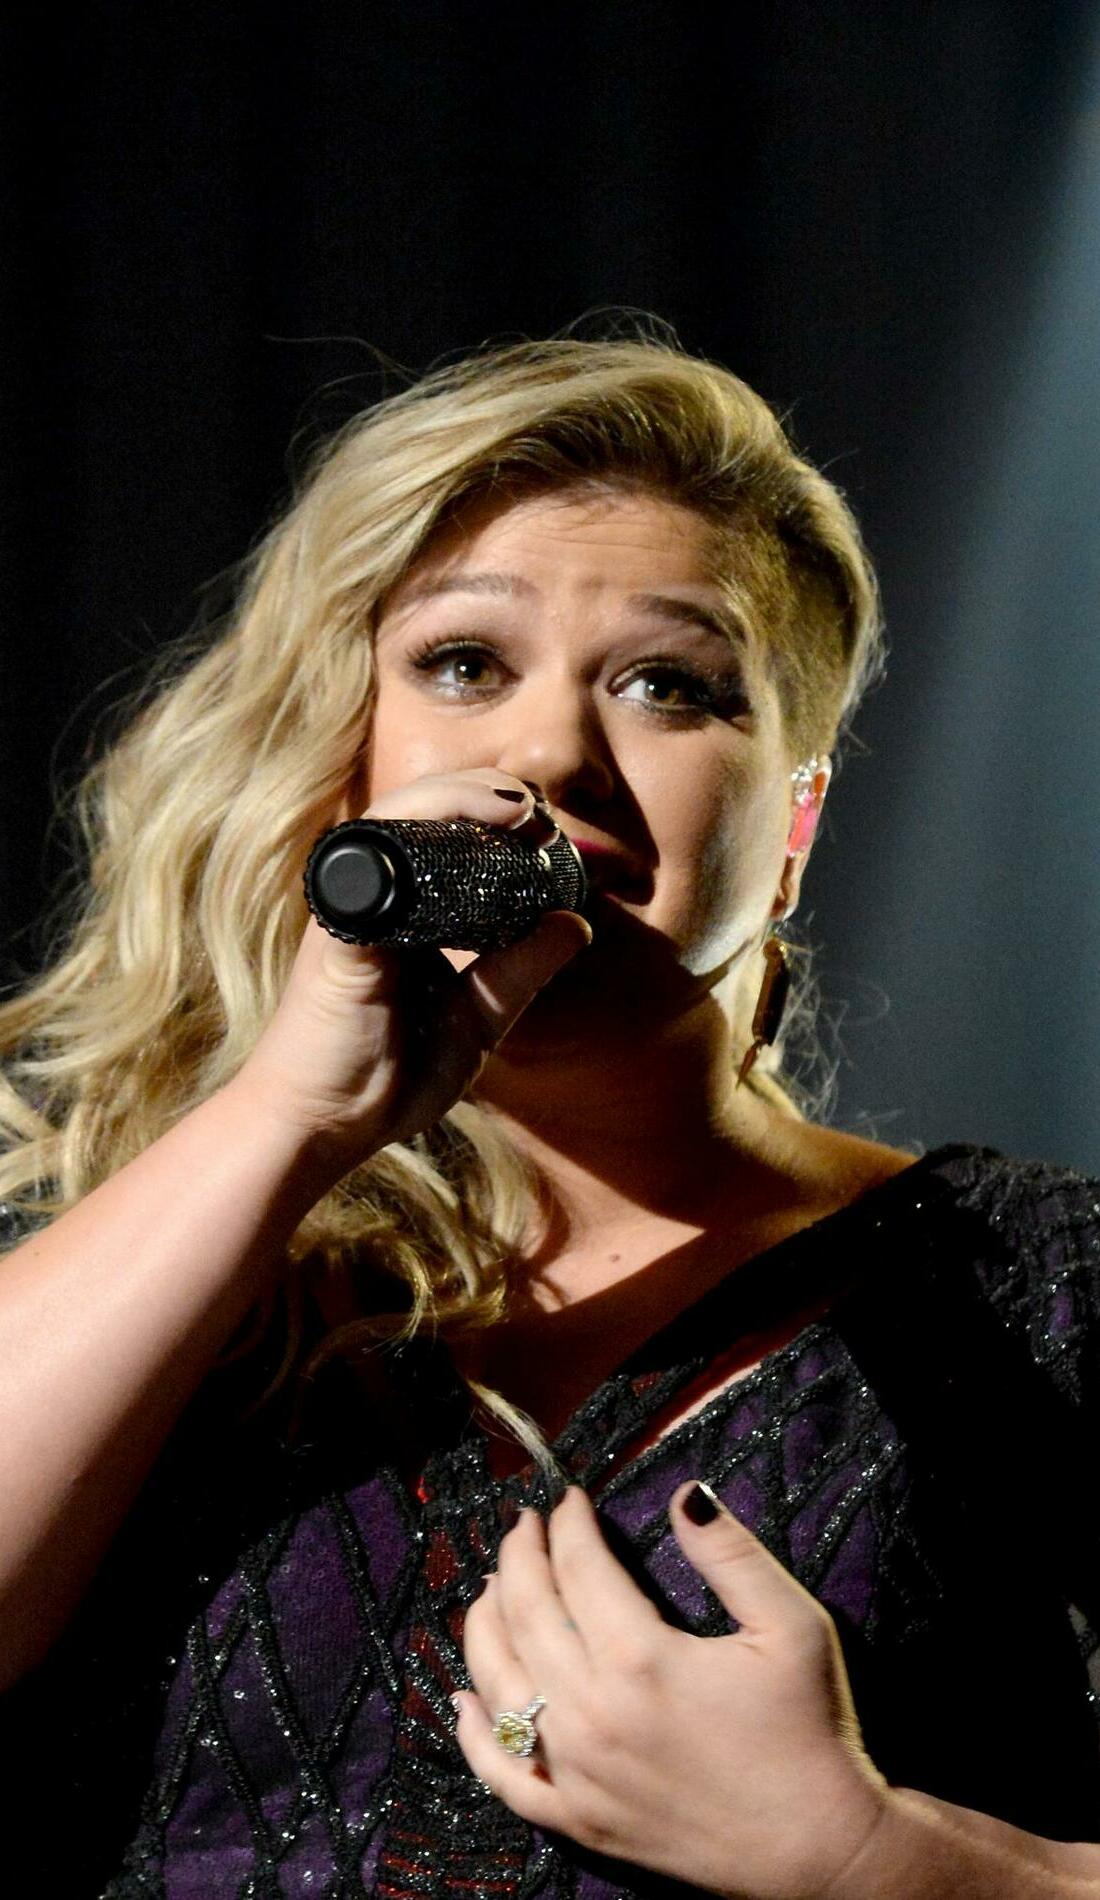 A Kelly Clarkson live event